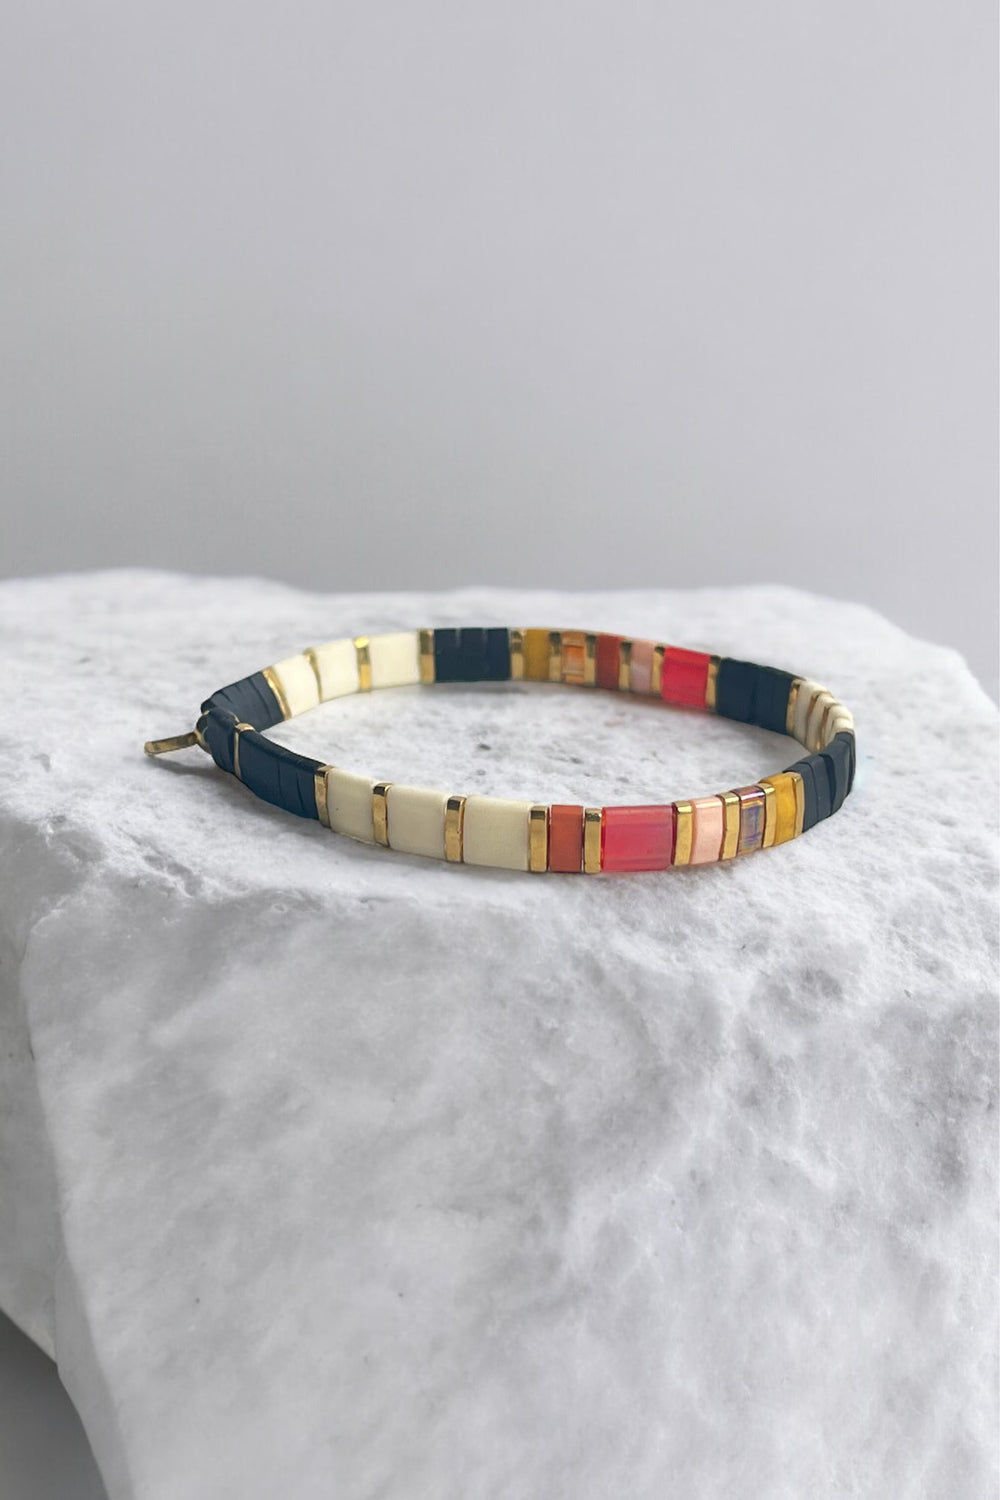 a pair of multicolored bracelets sitting on top of a rock